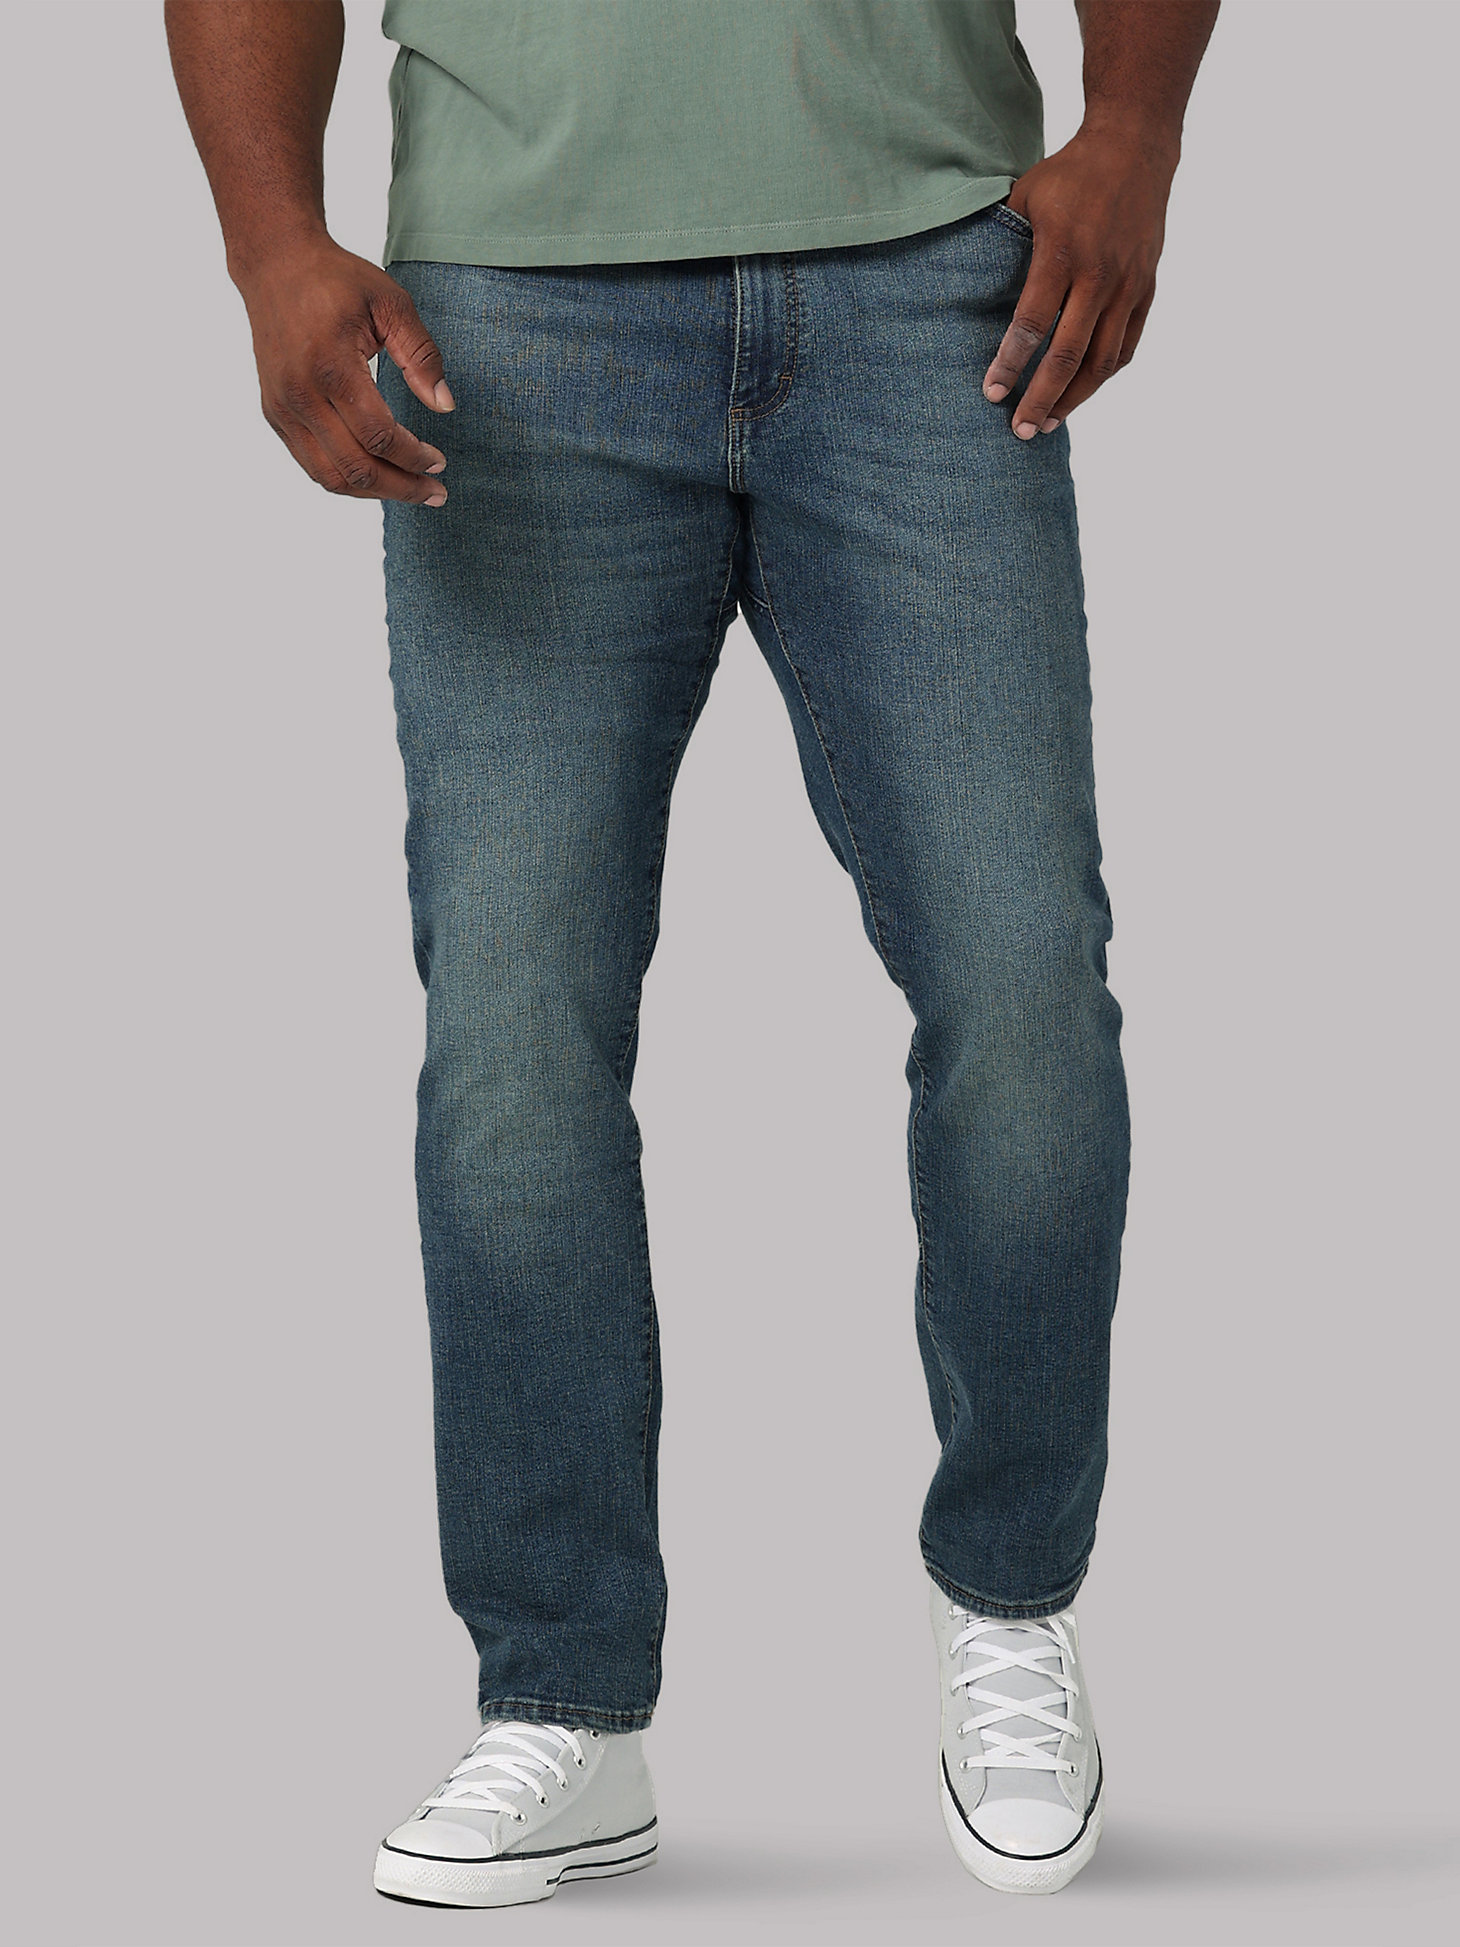 Men’s Extreme Motion Relaxed Jean (Big&Tall) in Mega main view